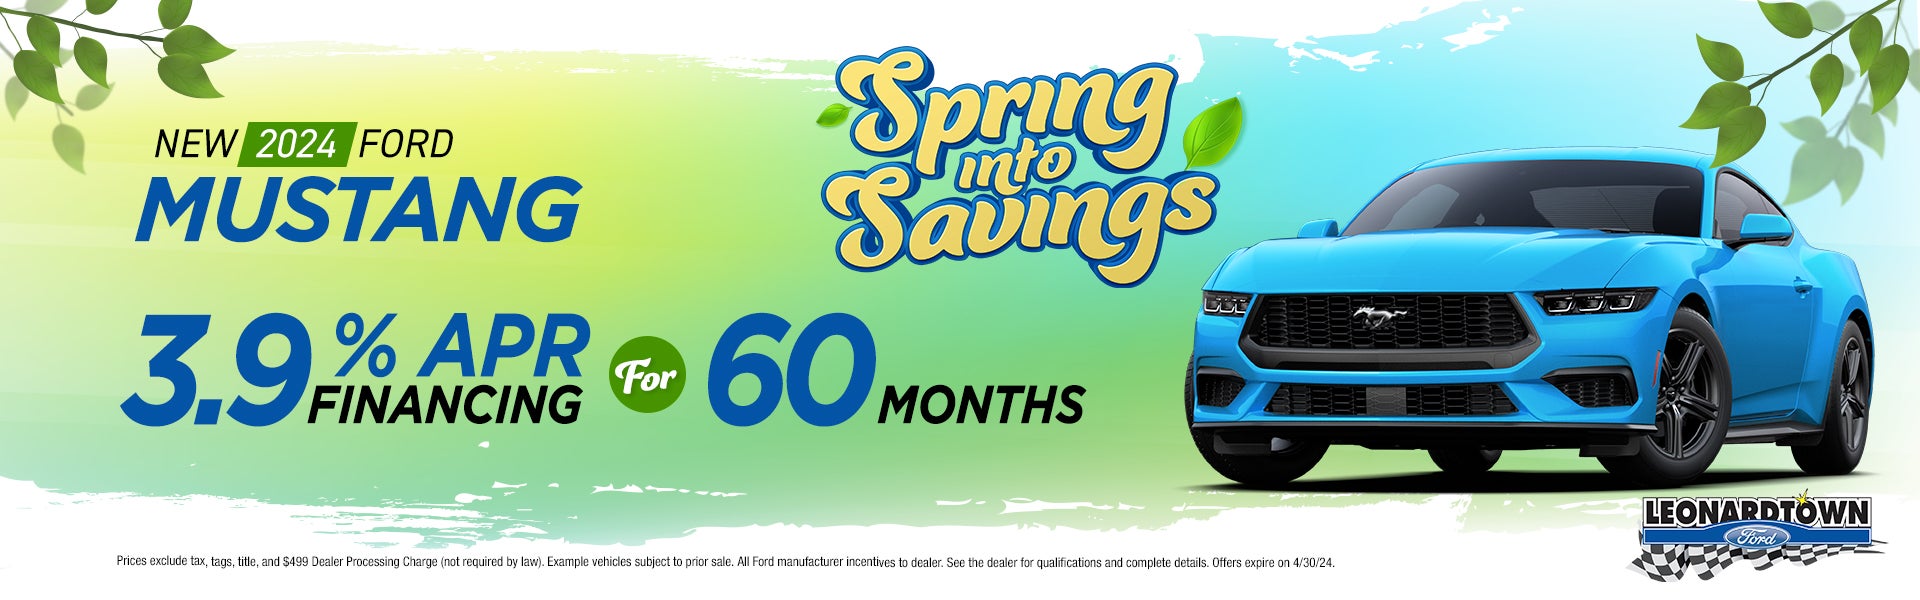 3.9% APR on Mustang!